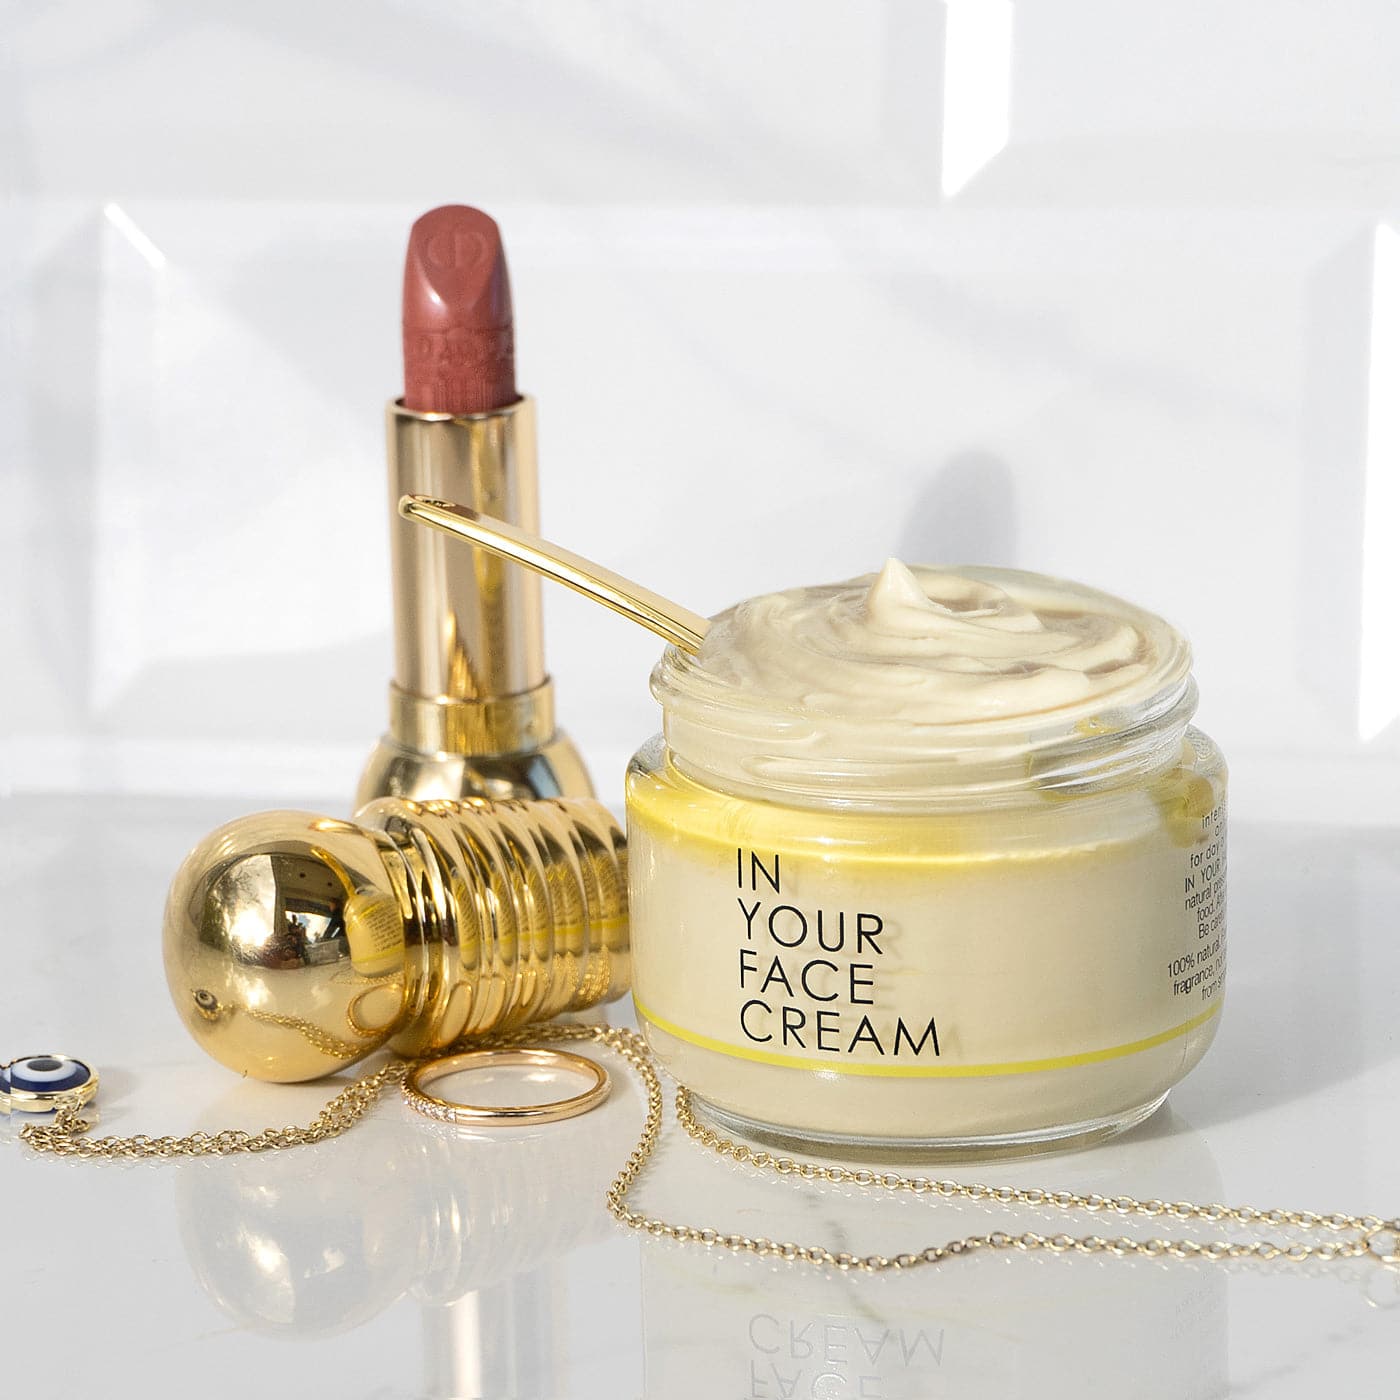 THE CREAM next to a tube of lipstick and jewelry